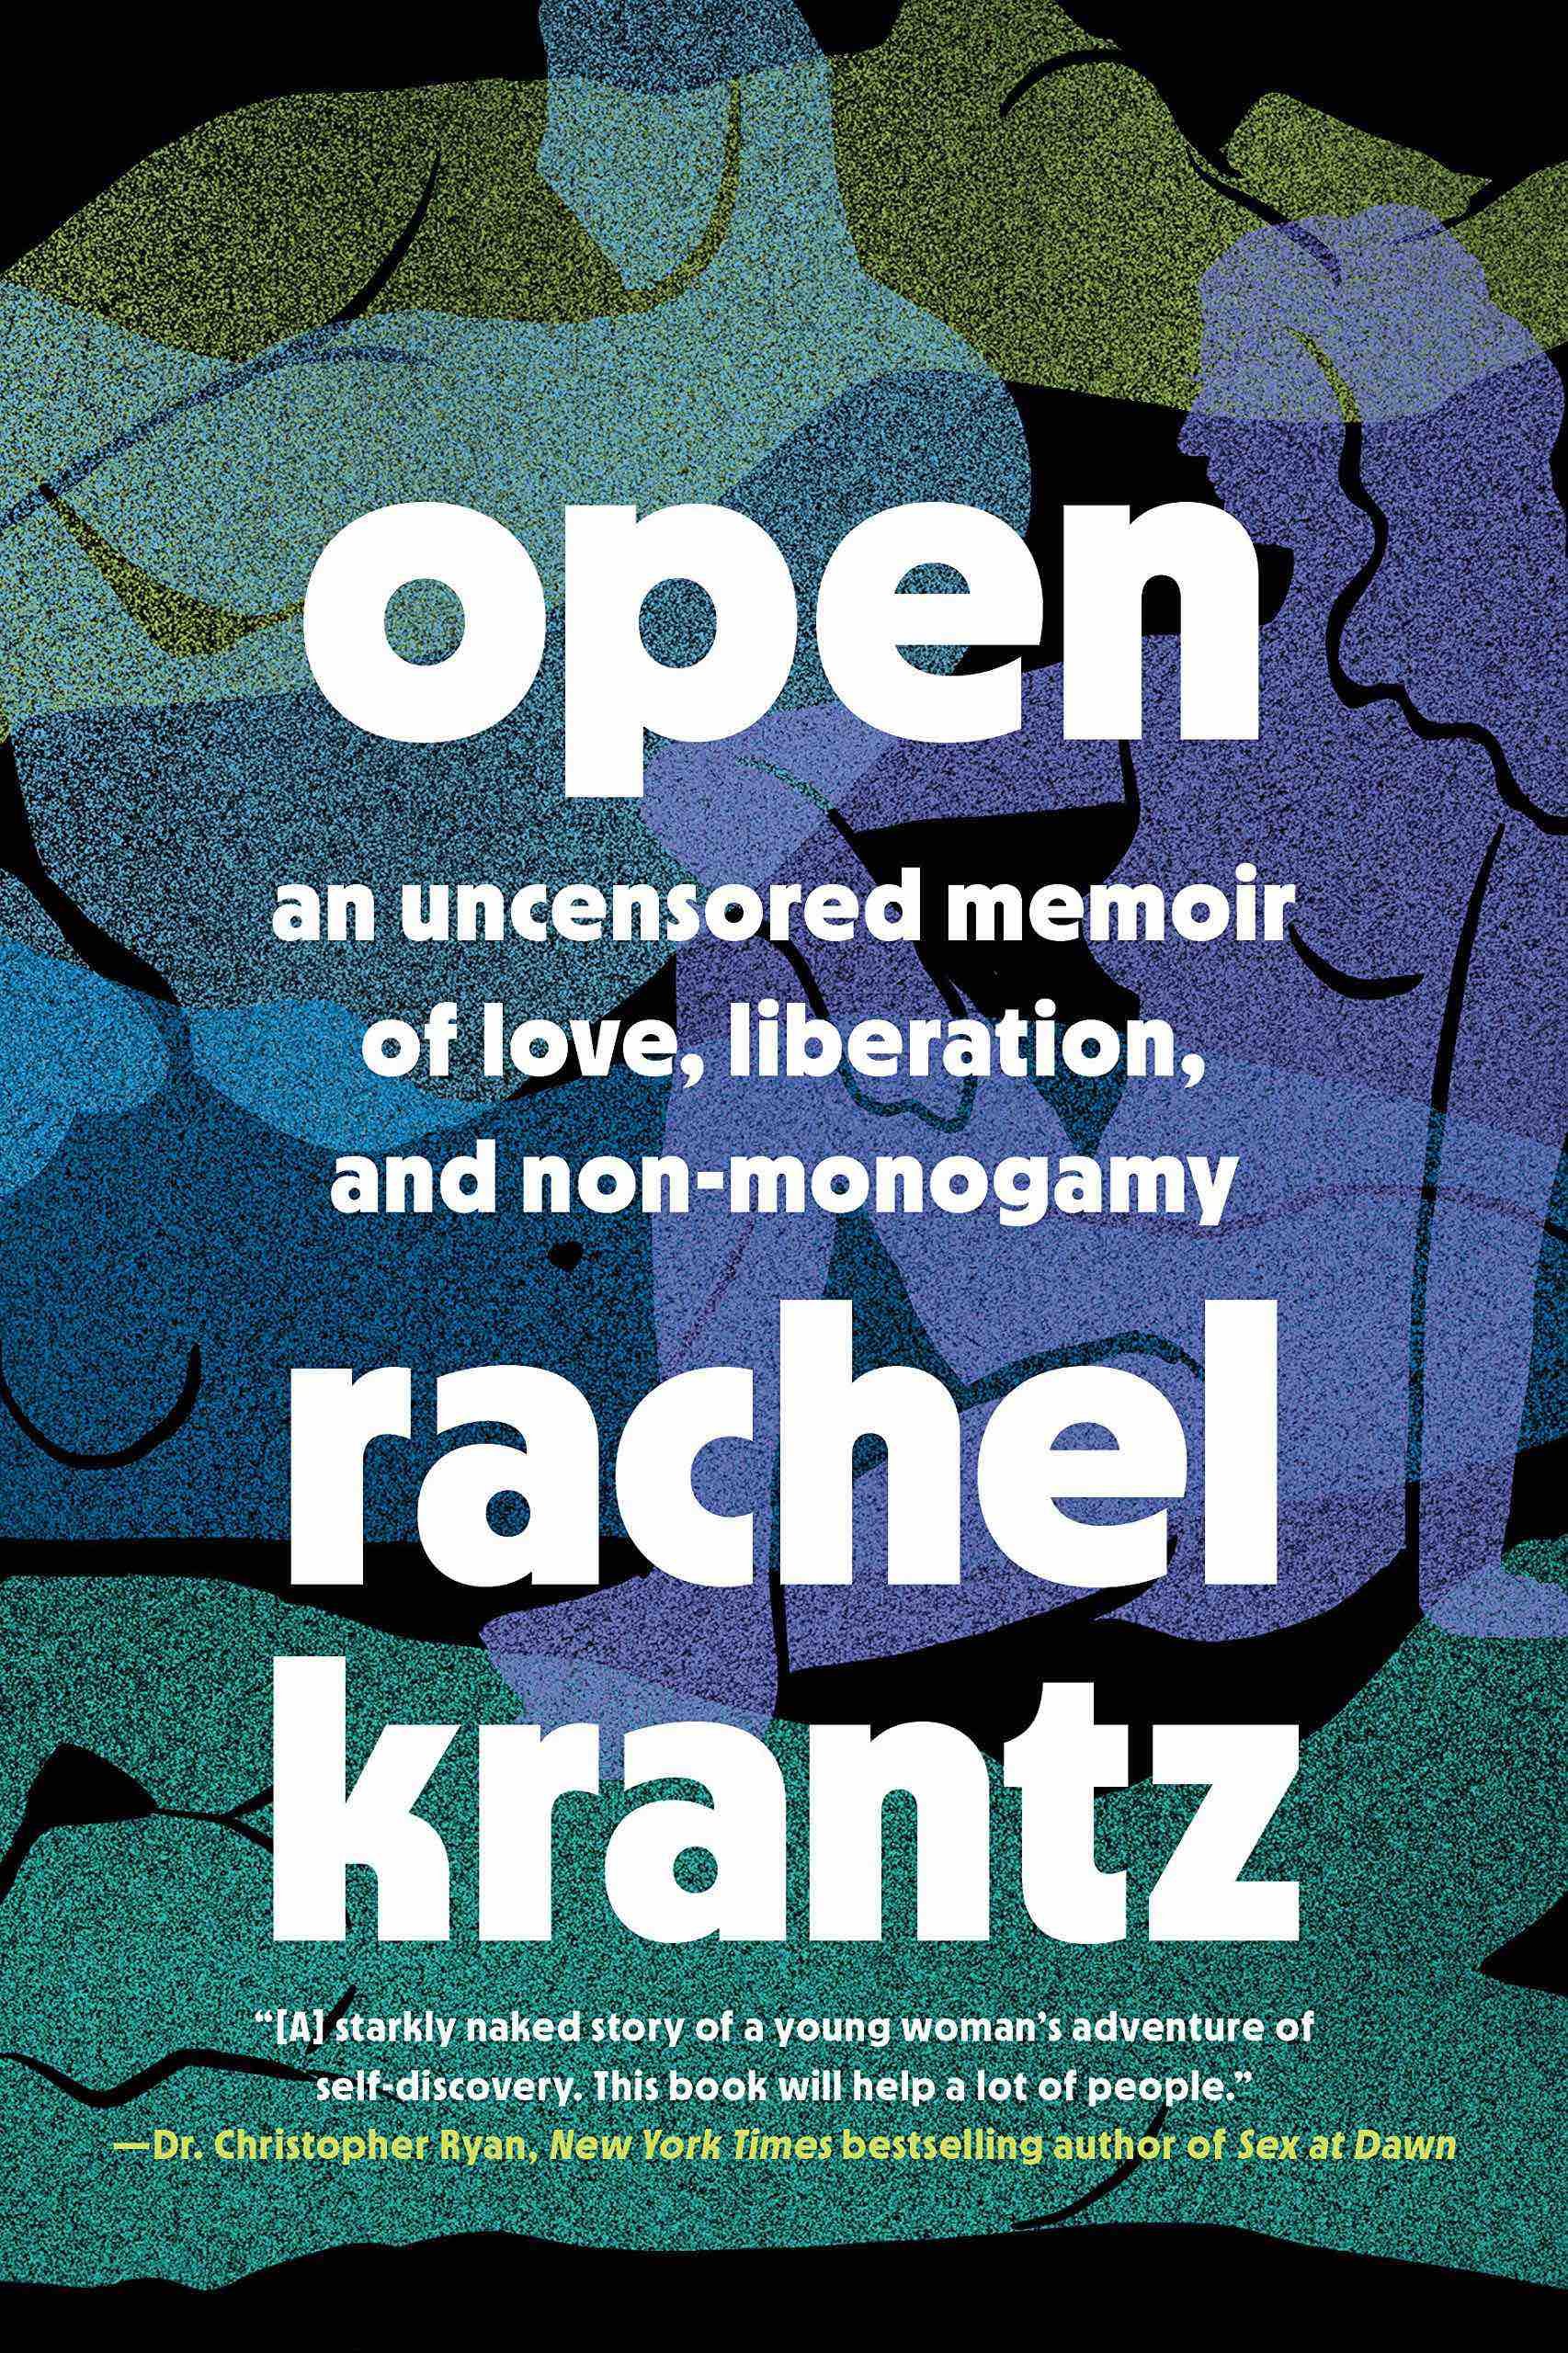 An unprecedented exploration of polyamory and gaslighting from an award-winning journalist chronicling her first open relationship as she explores this fast-growing movement